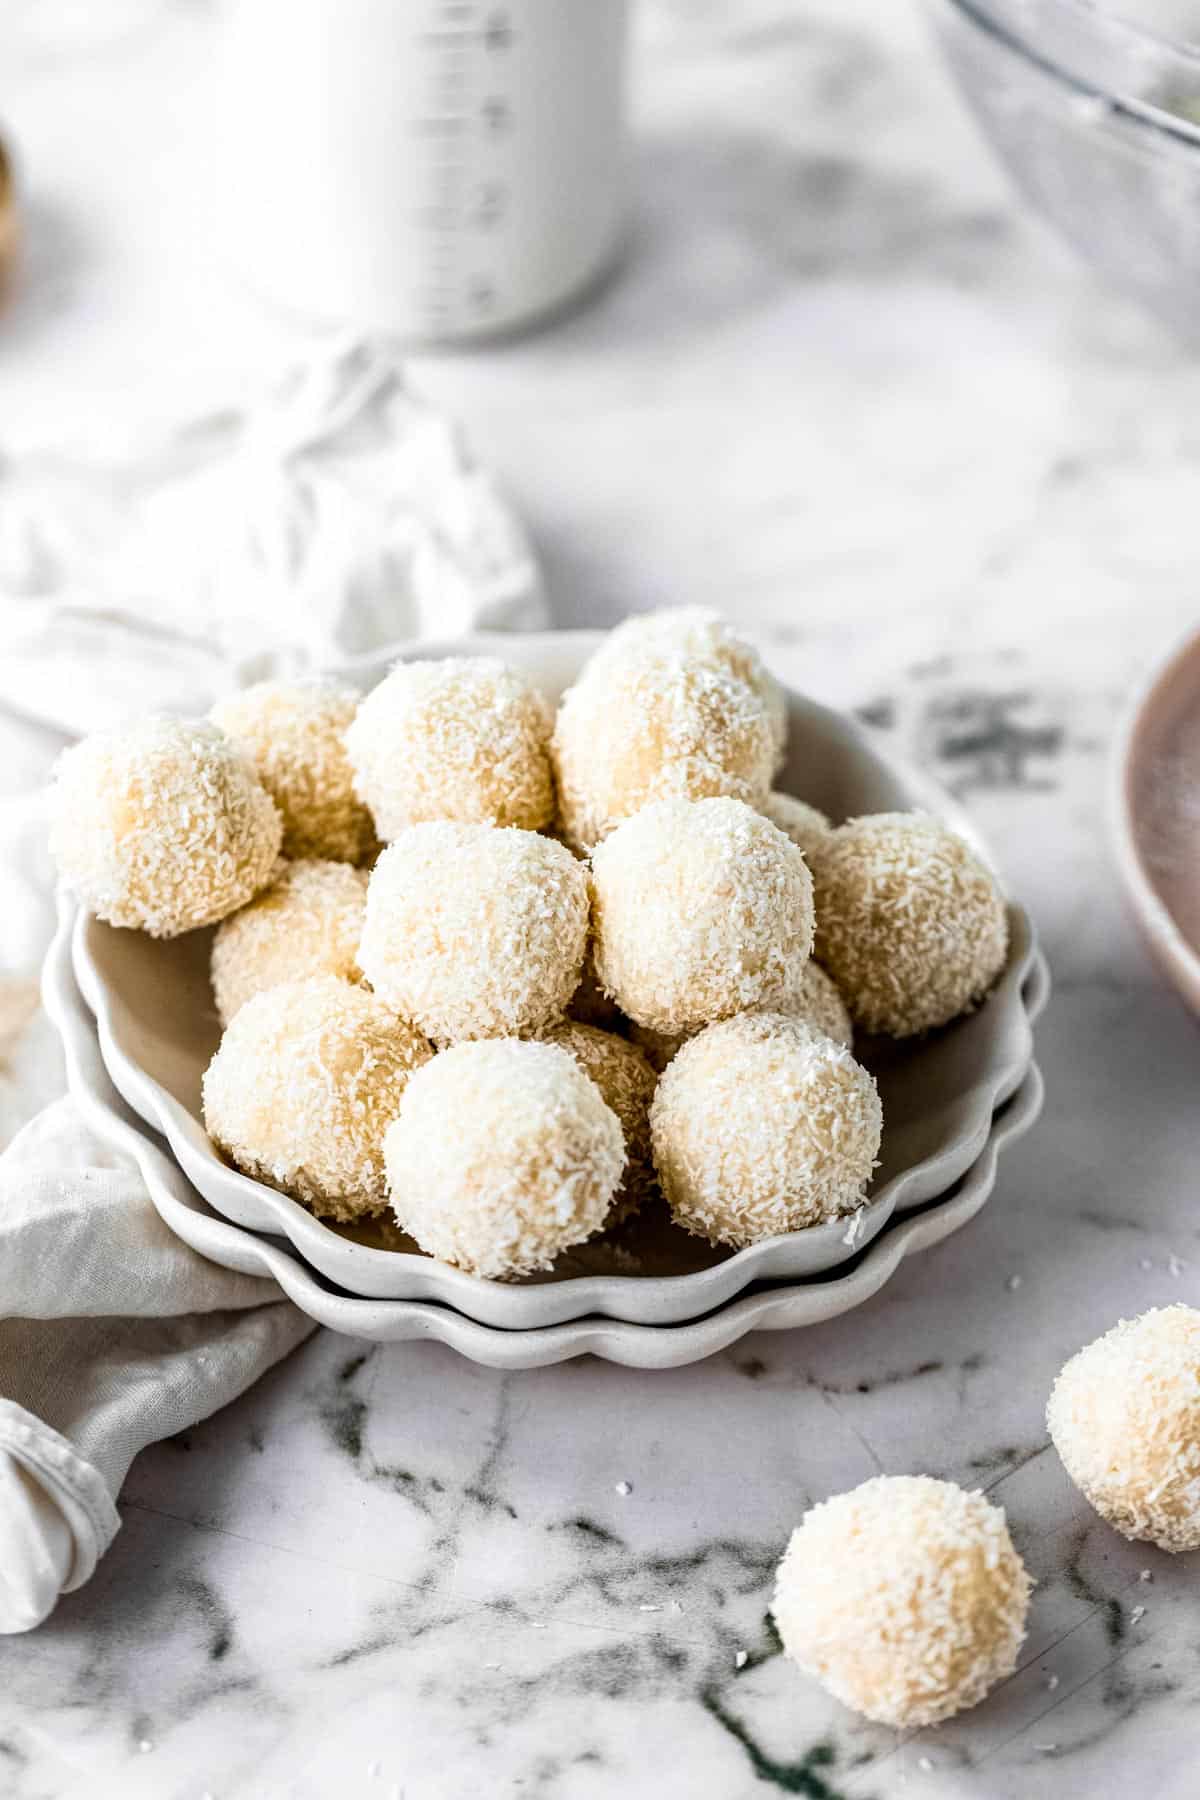 Pile of coconut bliss balls in a bowl.